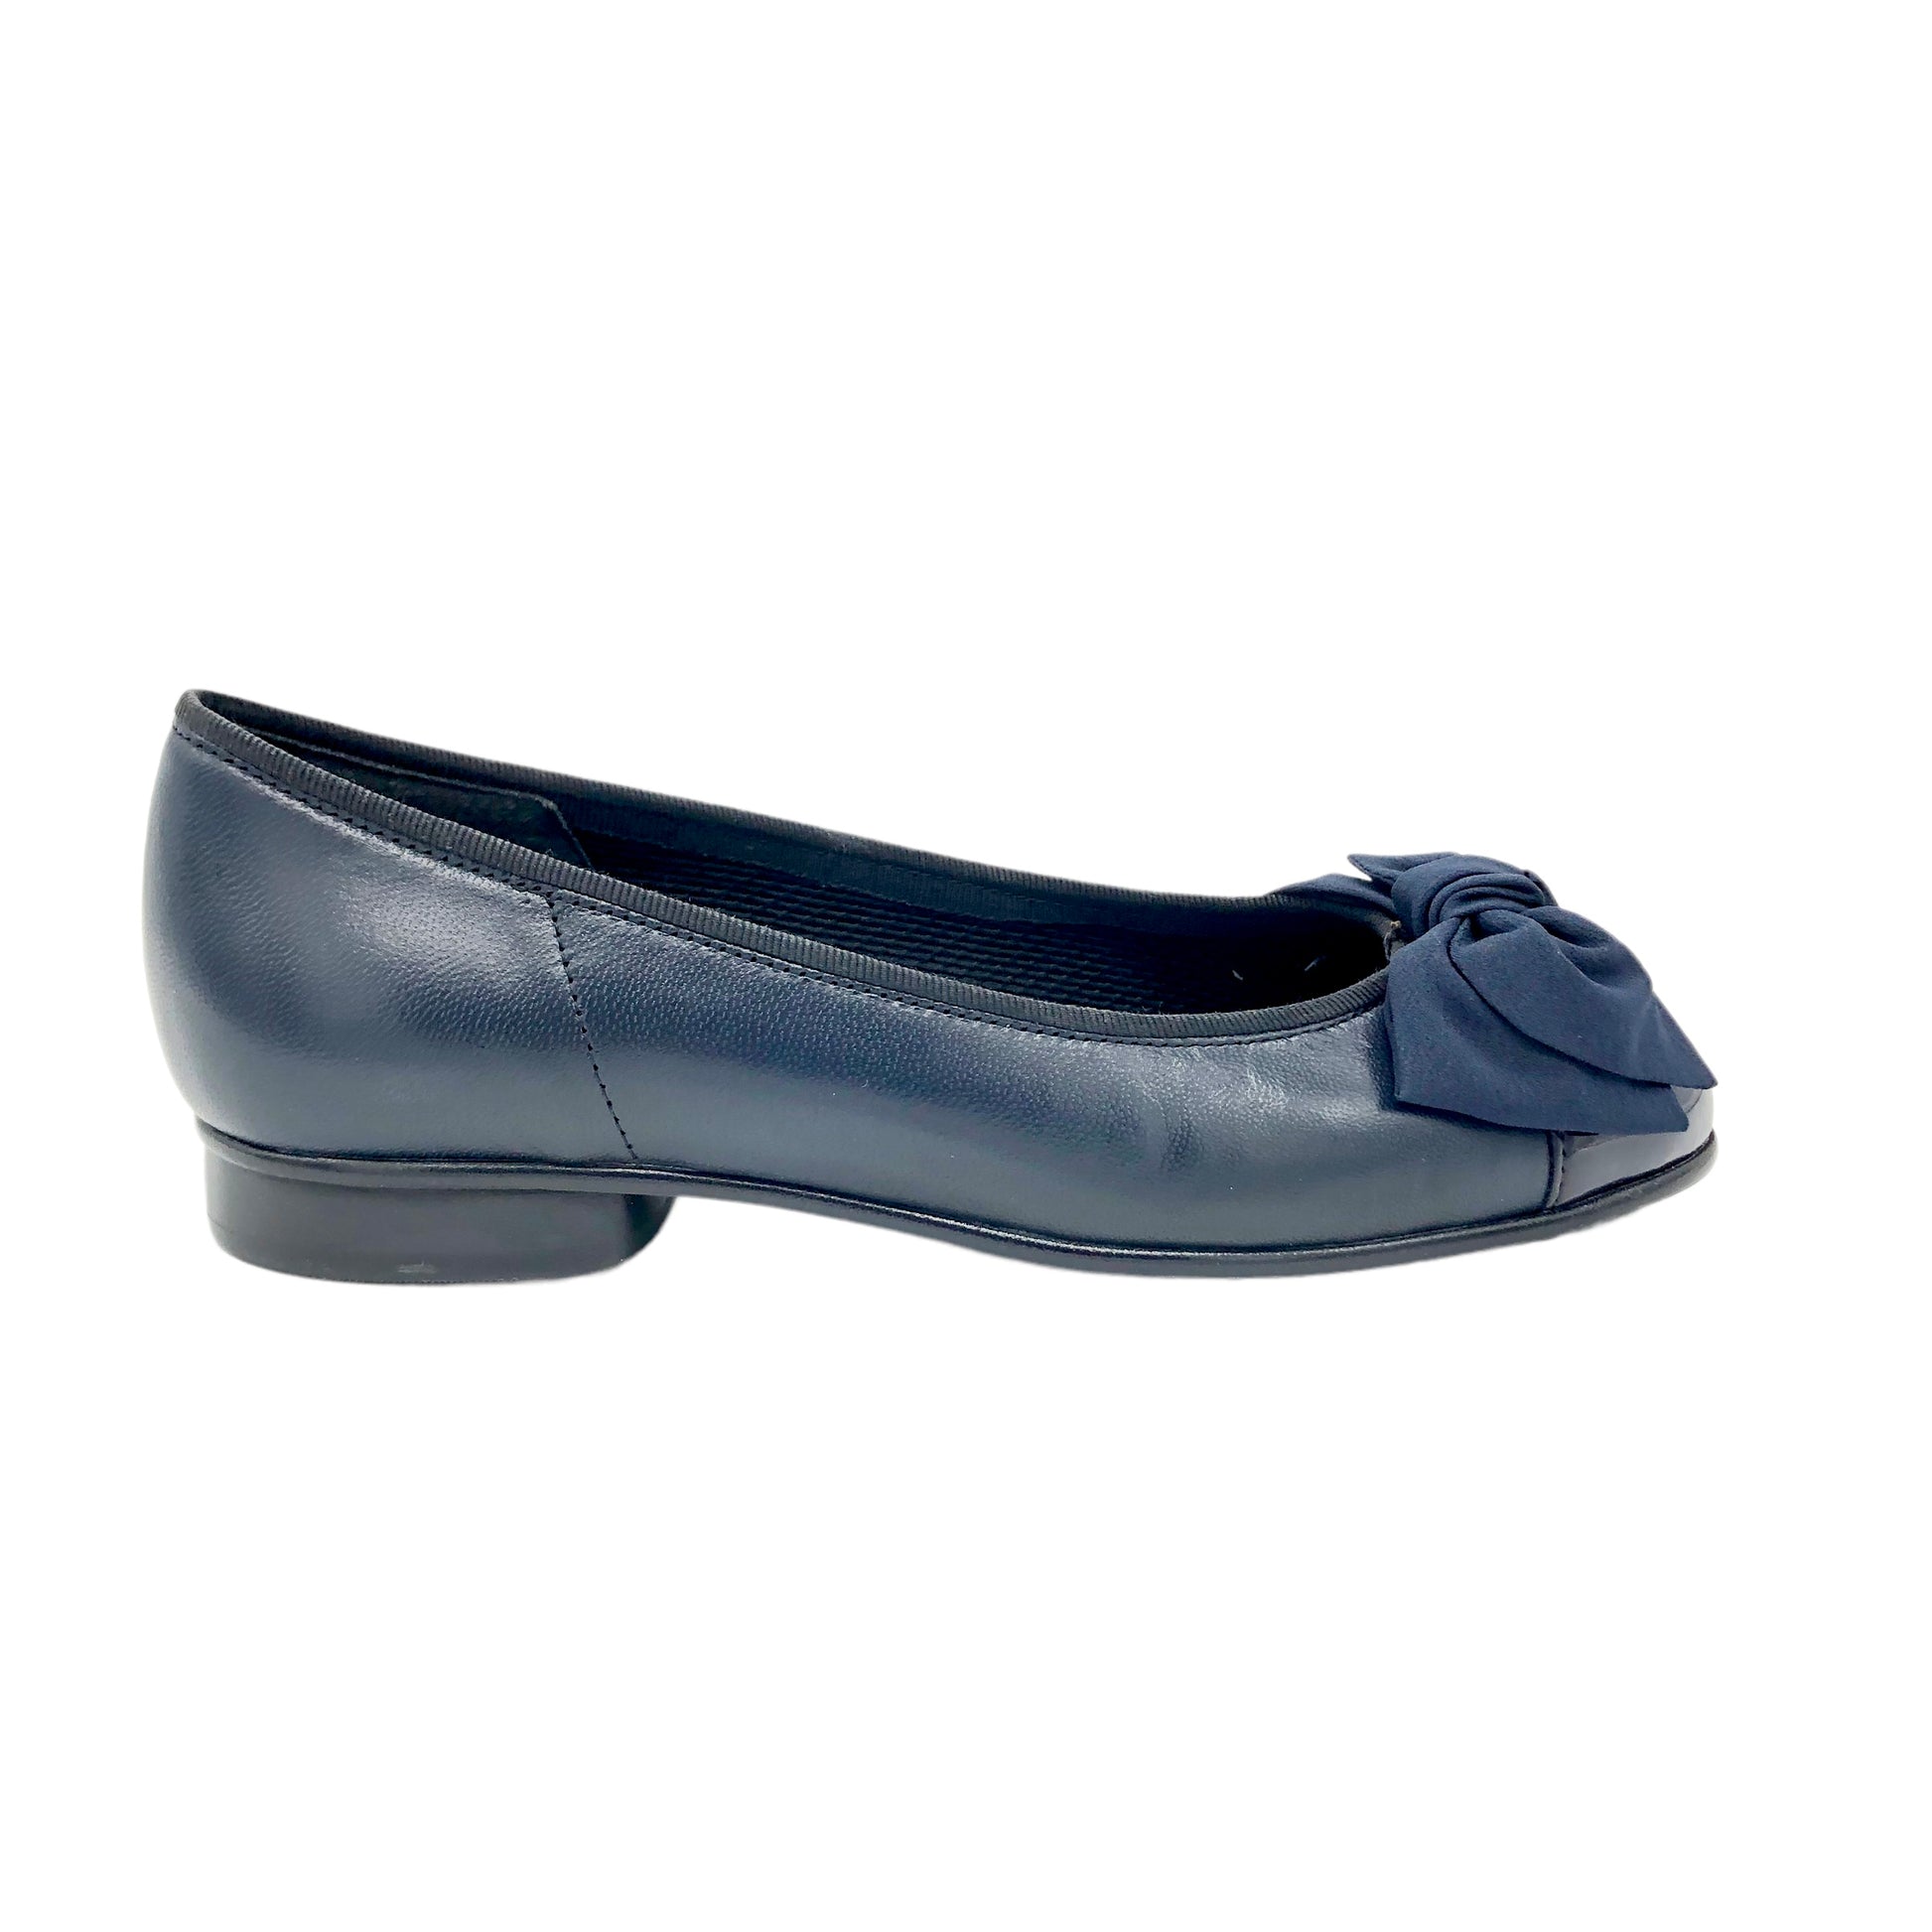 Gabor Amy 05.106 Navy blue leather ballet pumps with patent leather toe ...